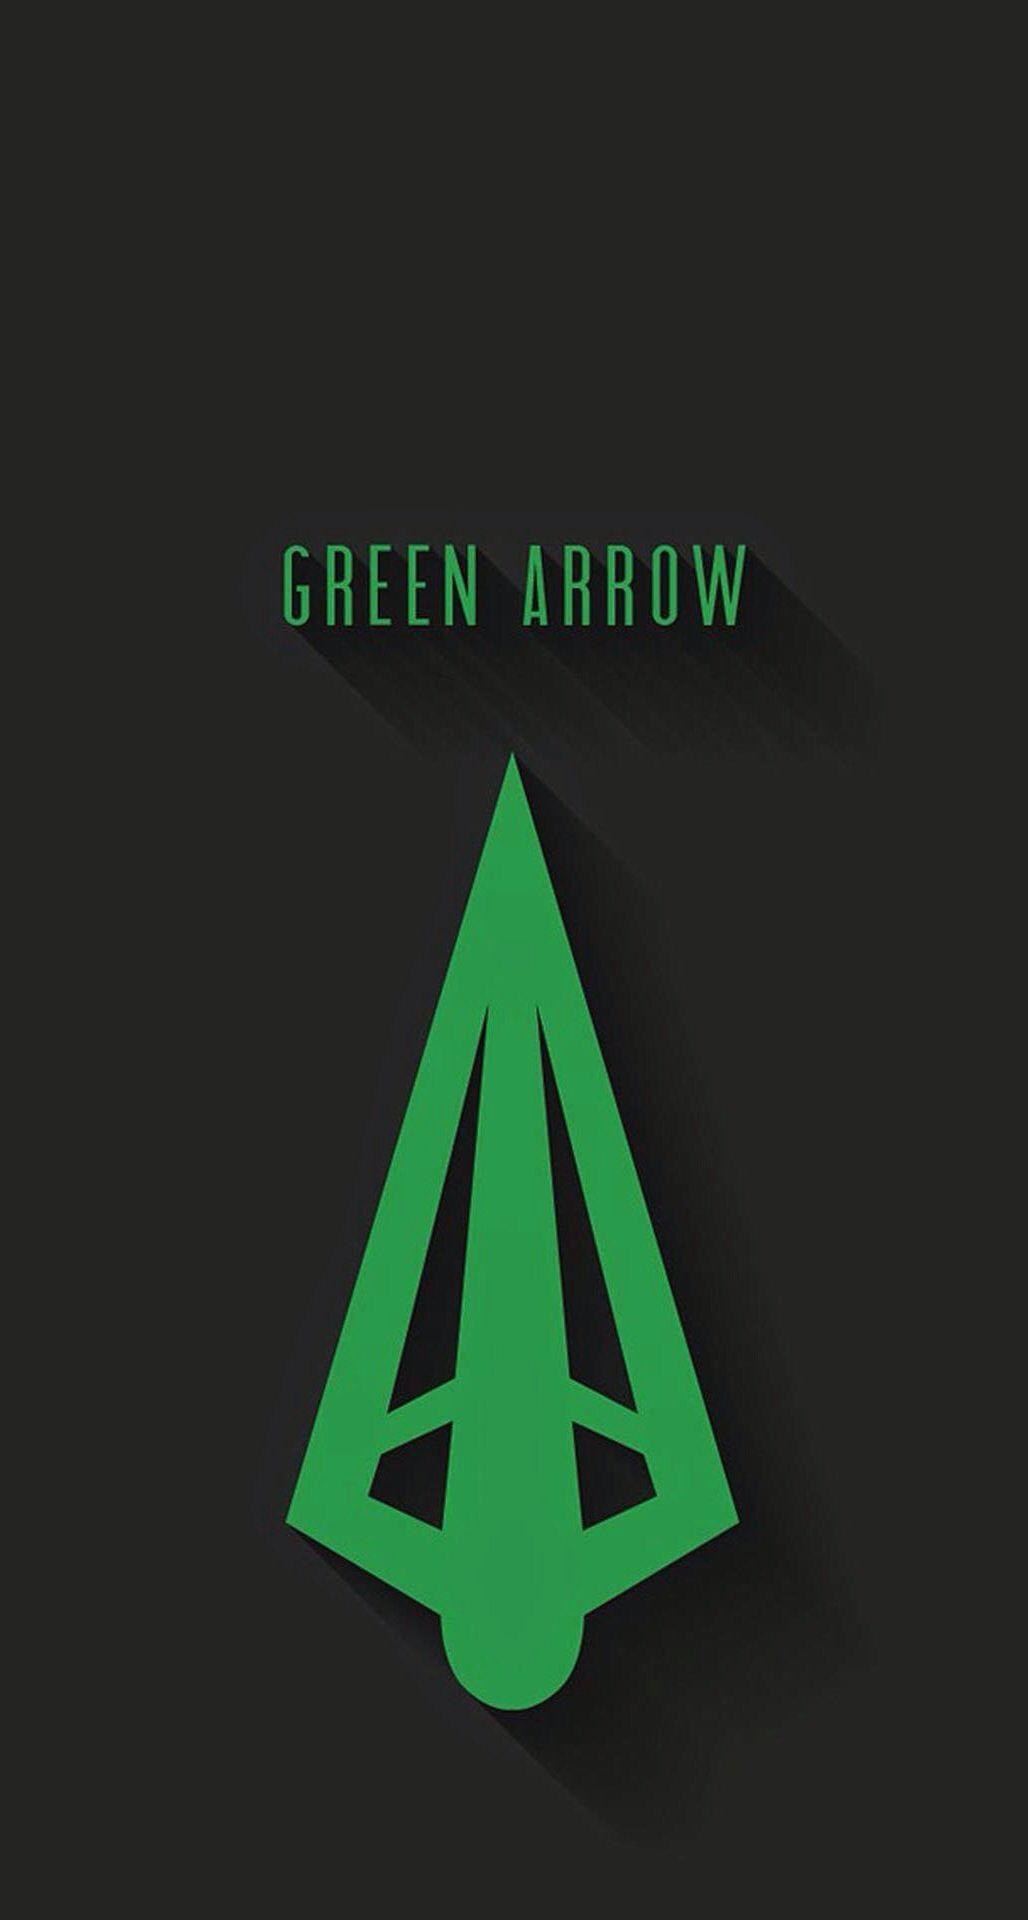 Green Arrow Logo - Green Arrow icon (Would make a cool Tattoo!) | It's not easy being ...